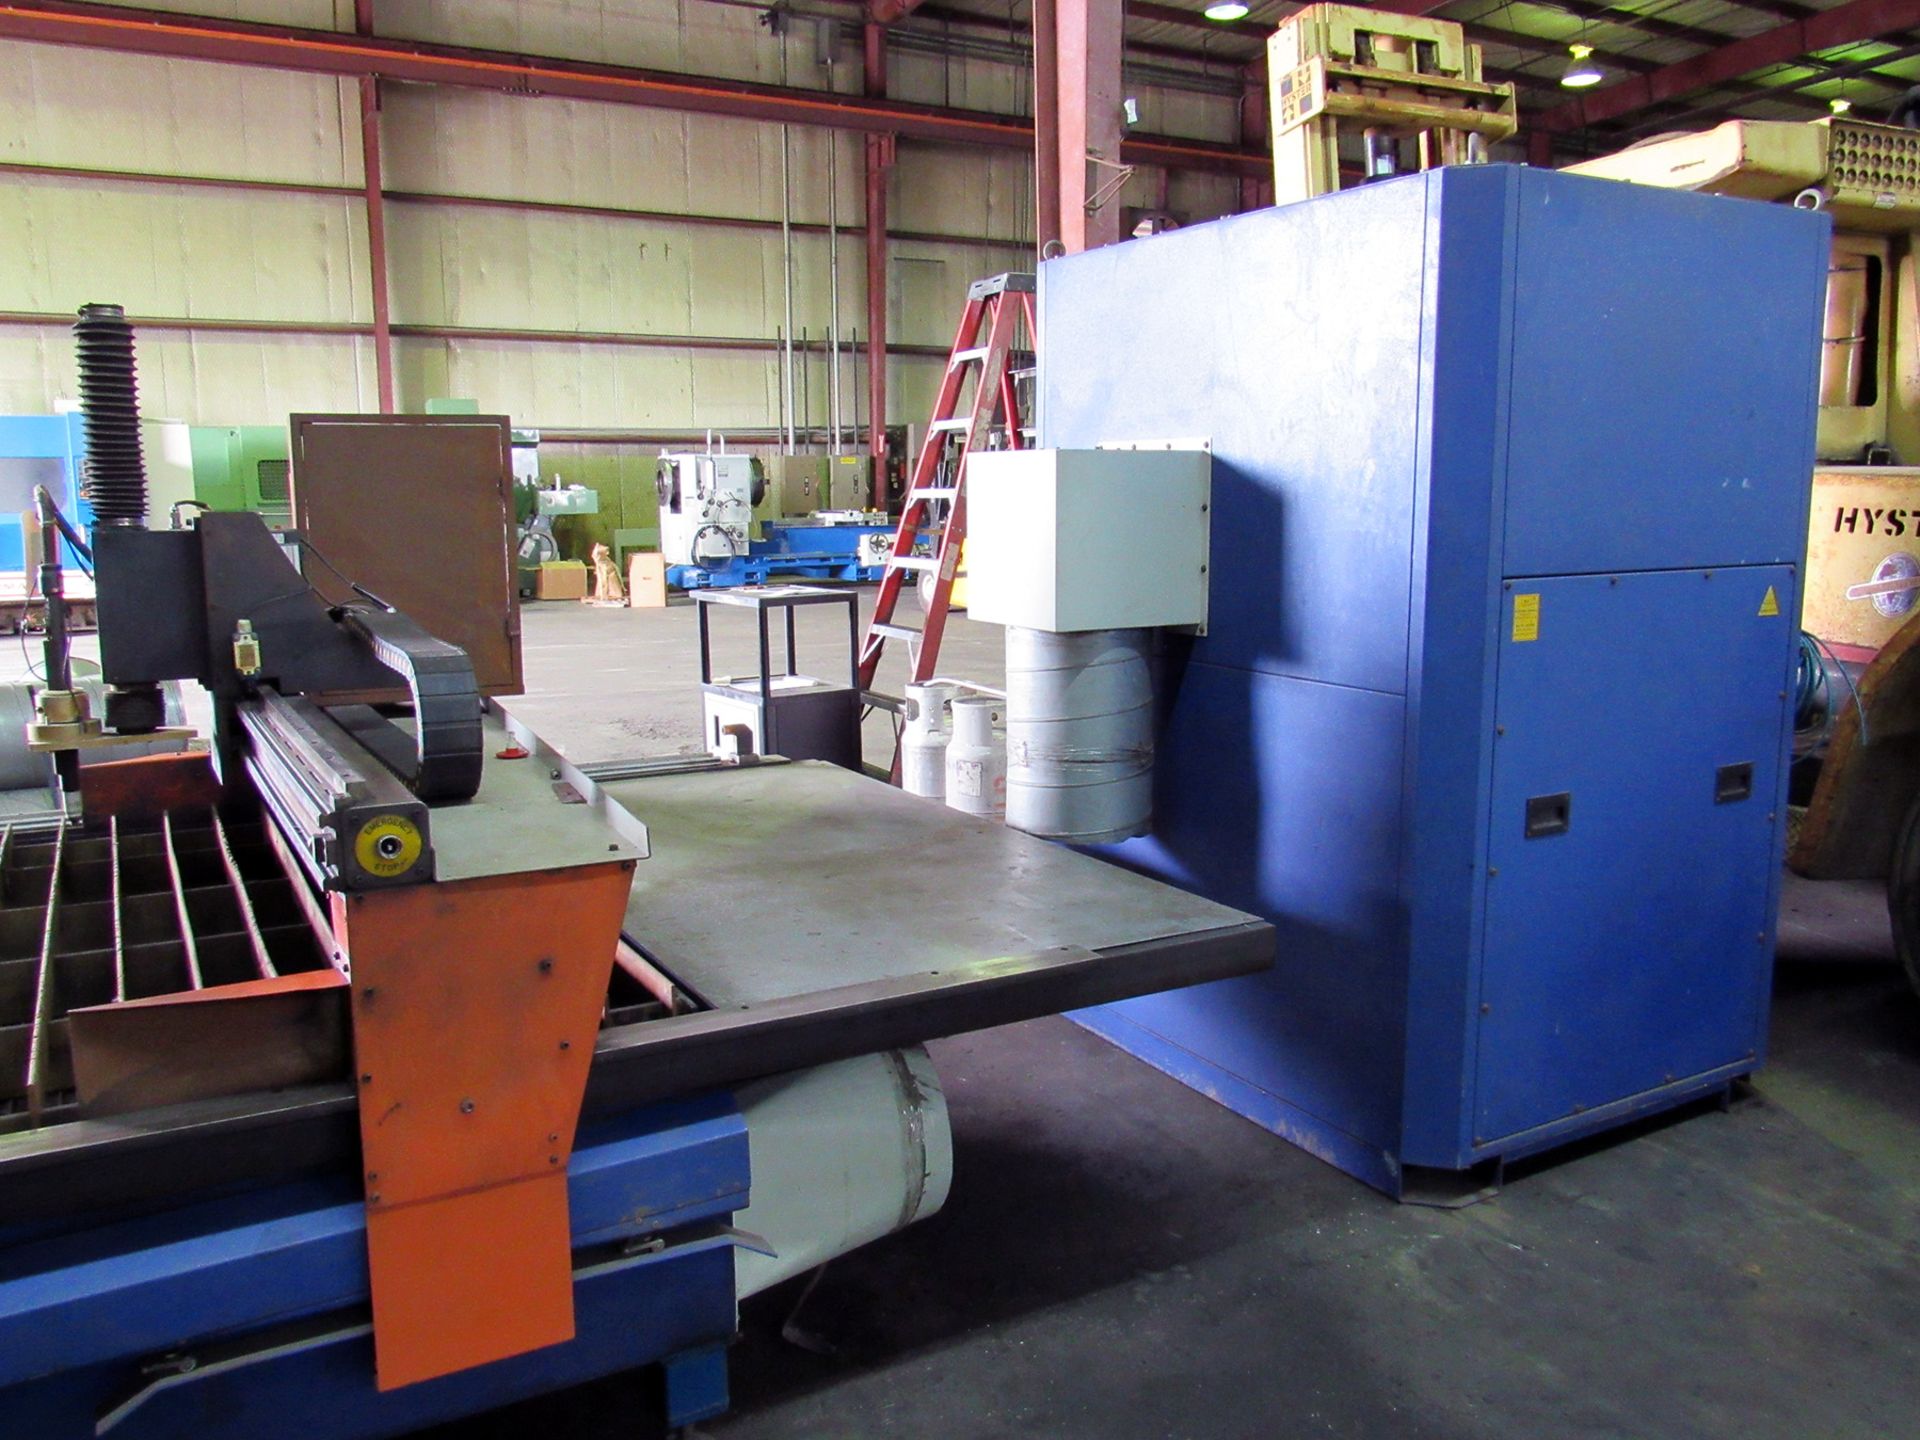 5' x 10' Vanguard CNC Plasma Cutting Machine with Dust Collector - Image 2 of 7